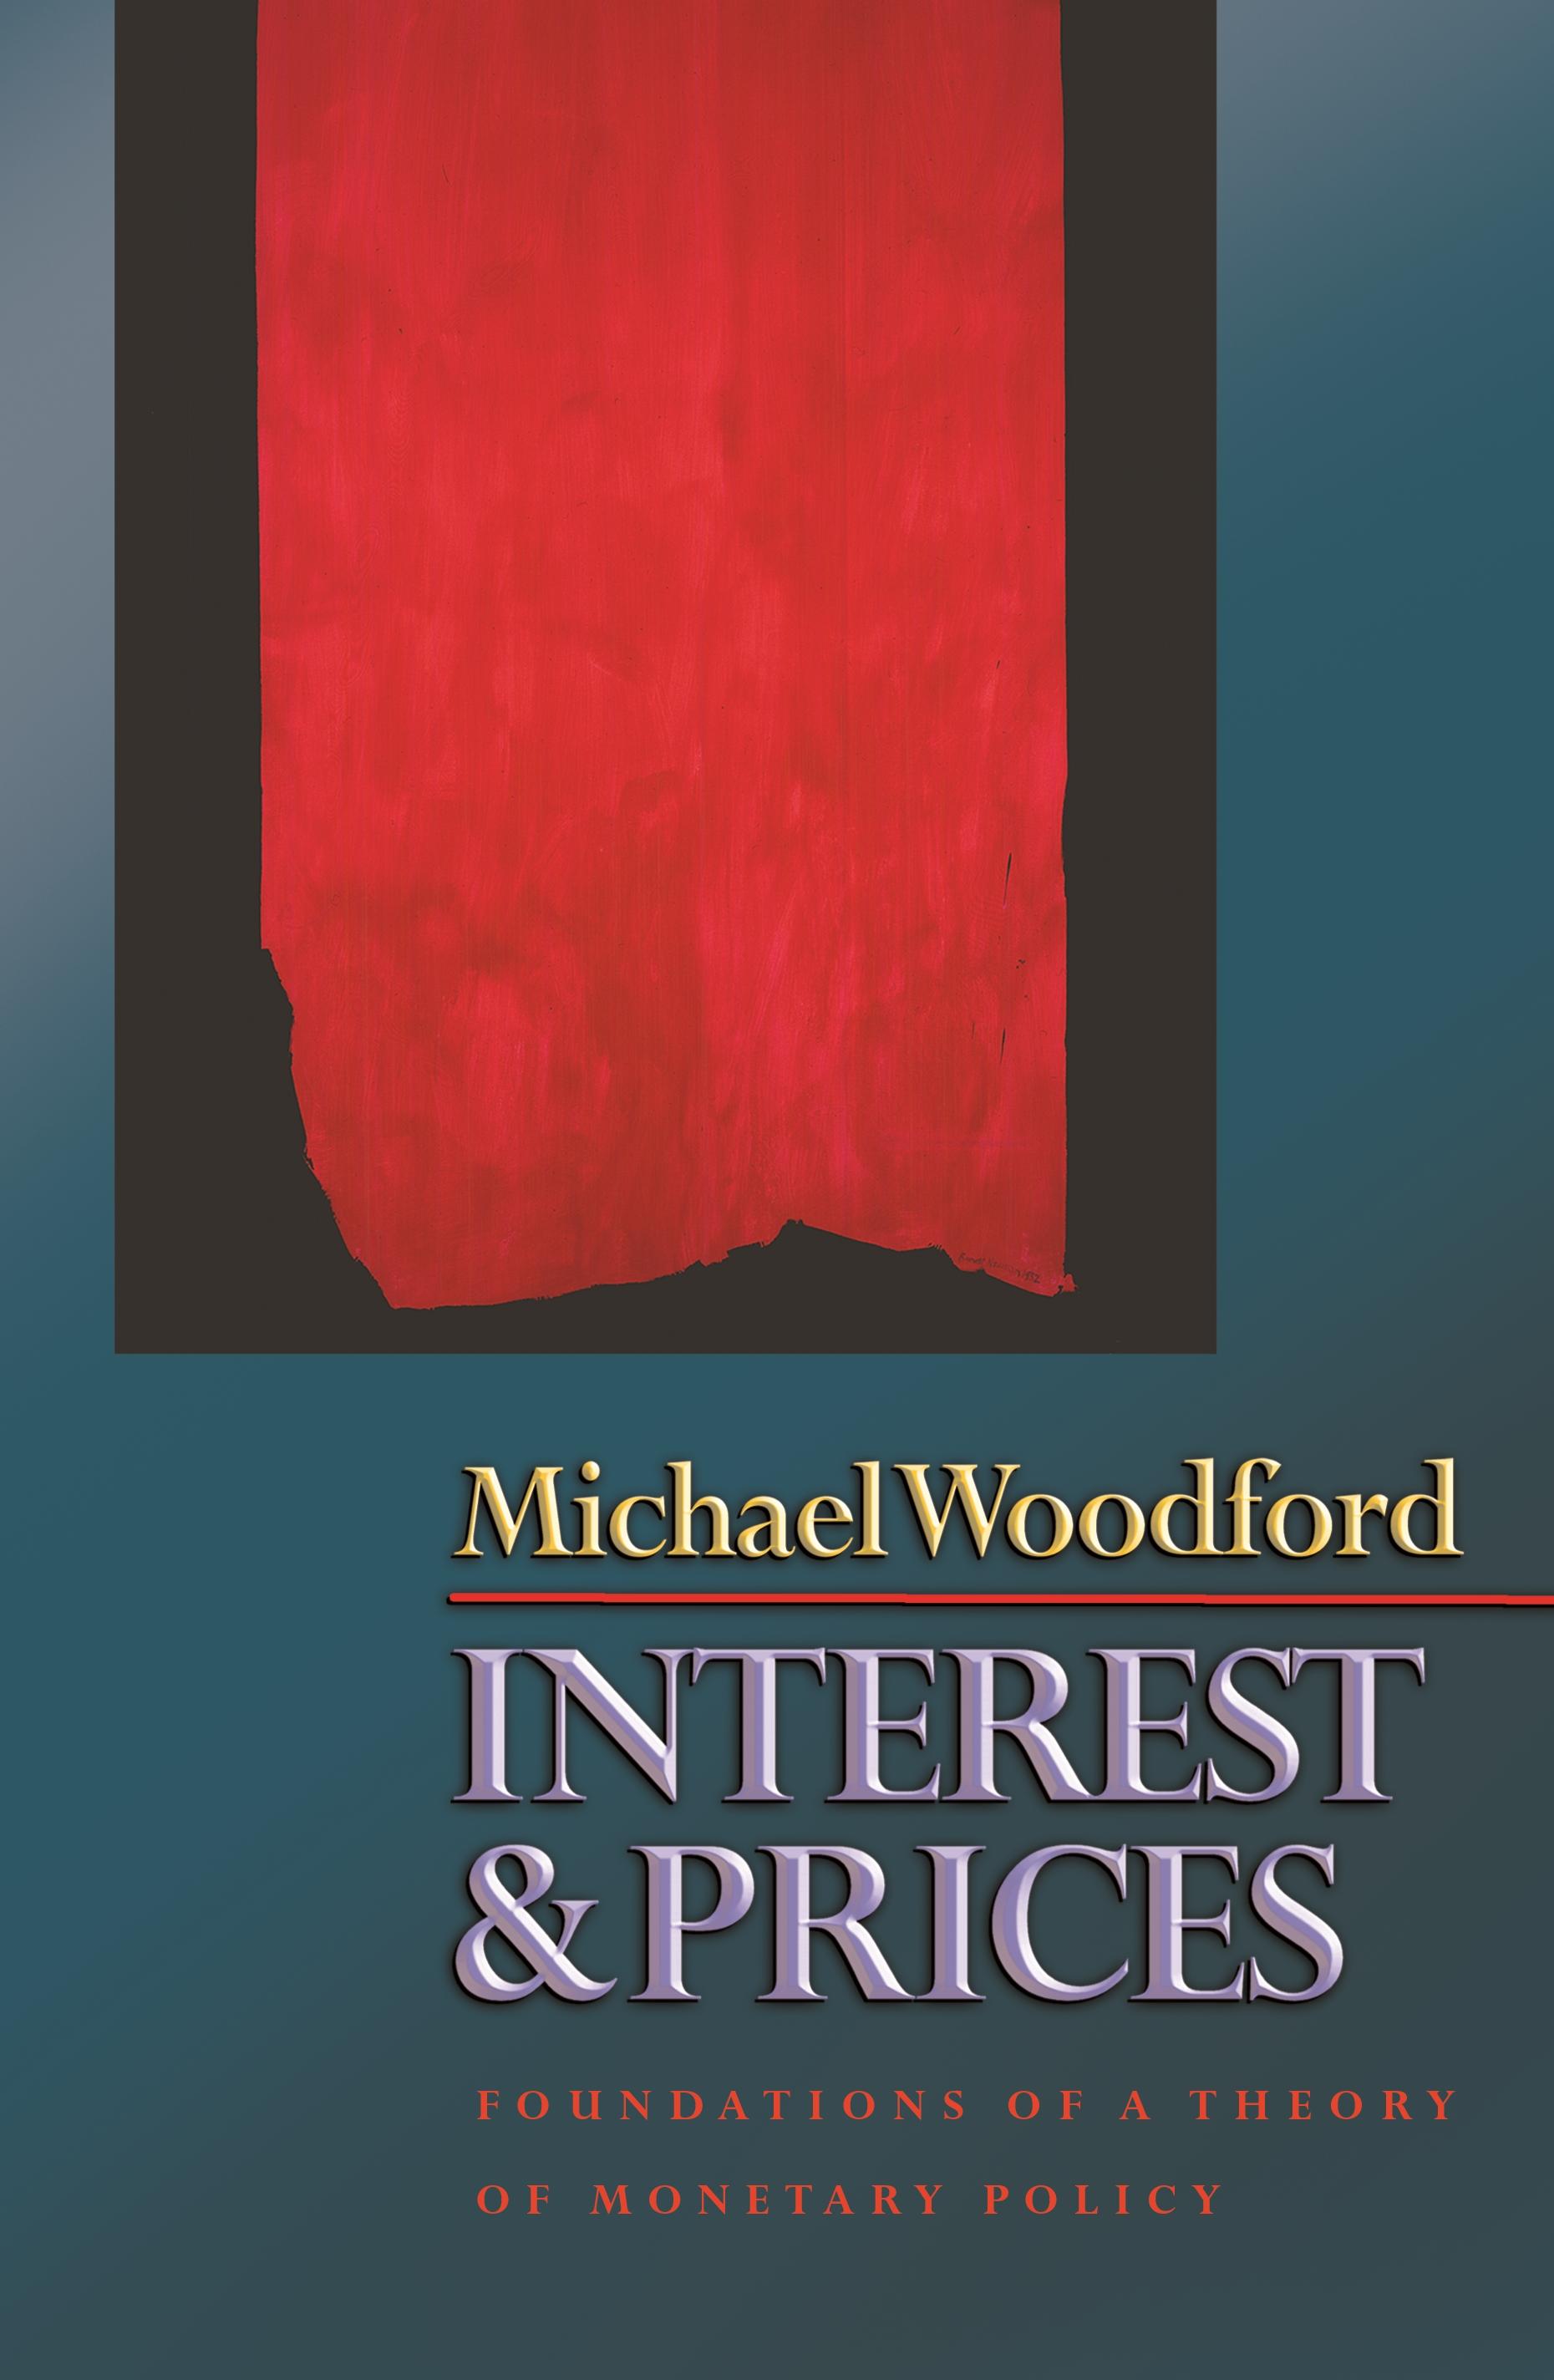 Interest and Prices / Foundations of a Theory of Monetary Policy / Michael Woodford / Buch / Gebunden / Englisch / 2003 / Princeton University Press / EAN 9780691010496 - Woodford, Michael